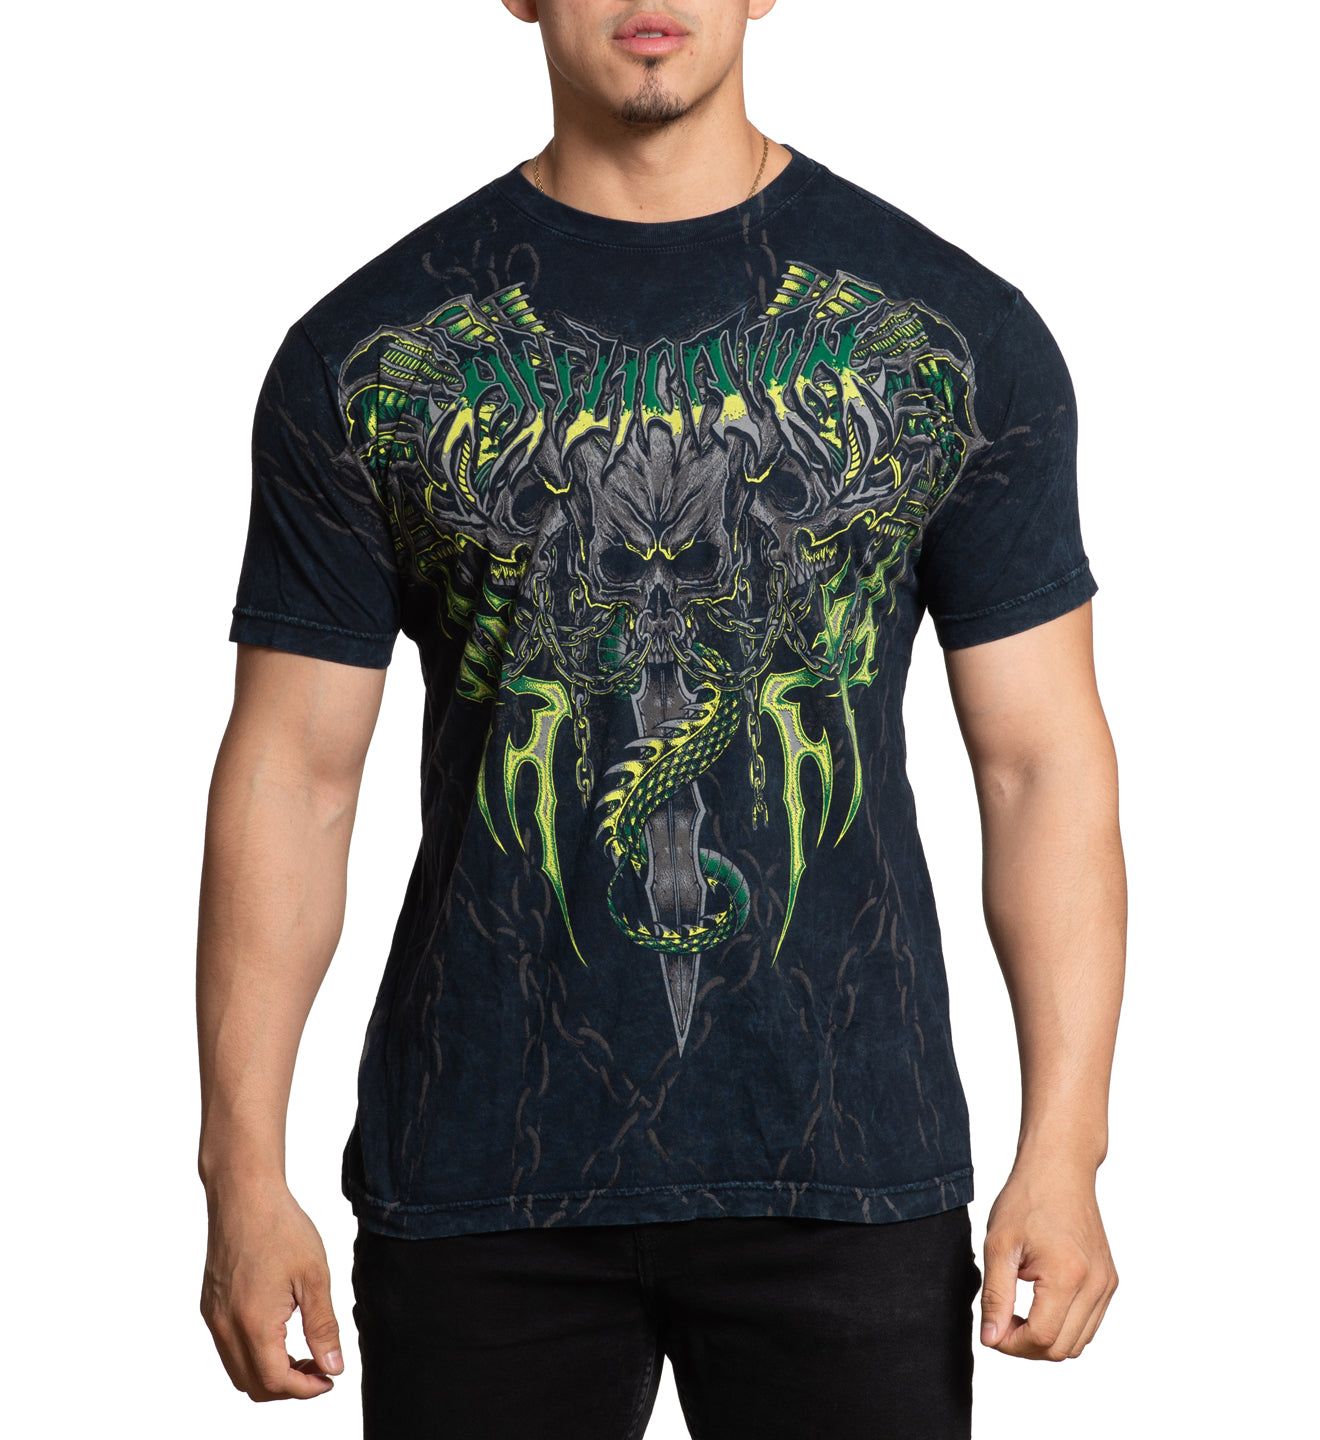 Primal Tech - Affliction Clothing